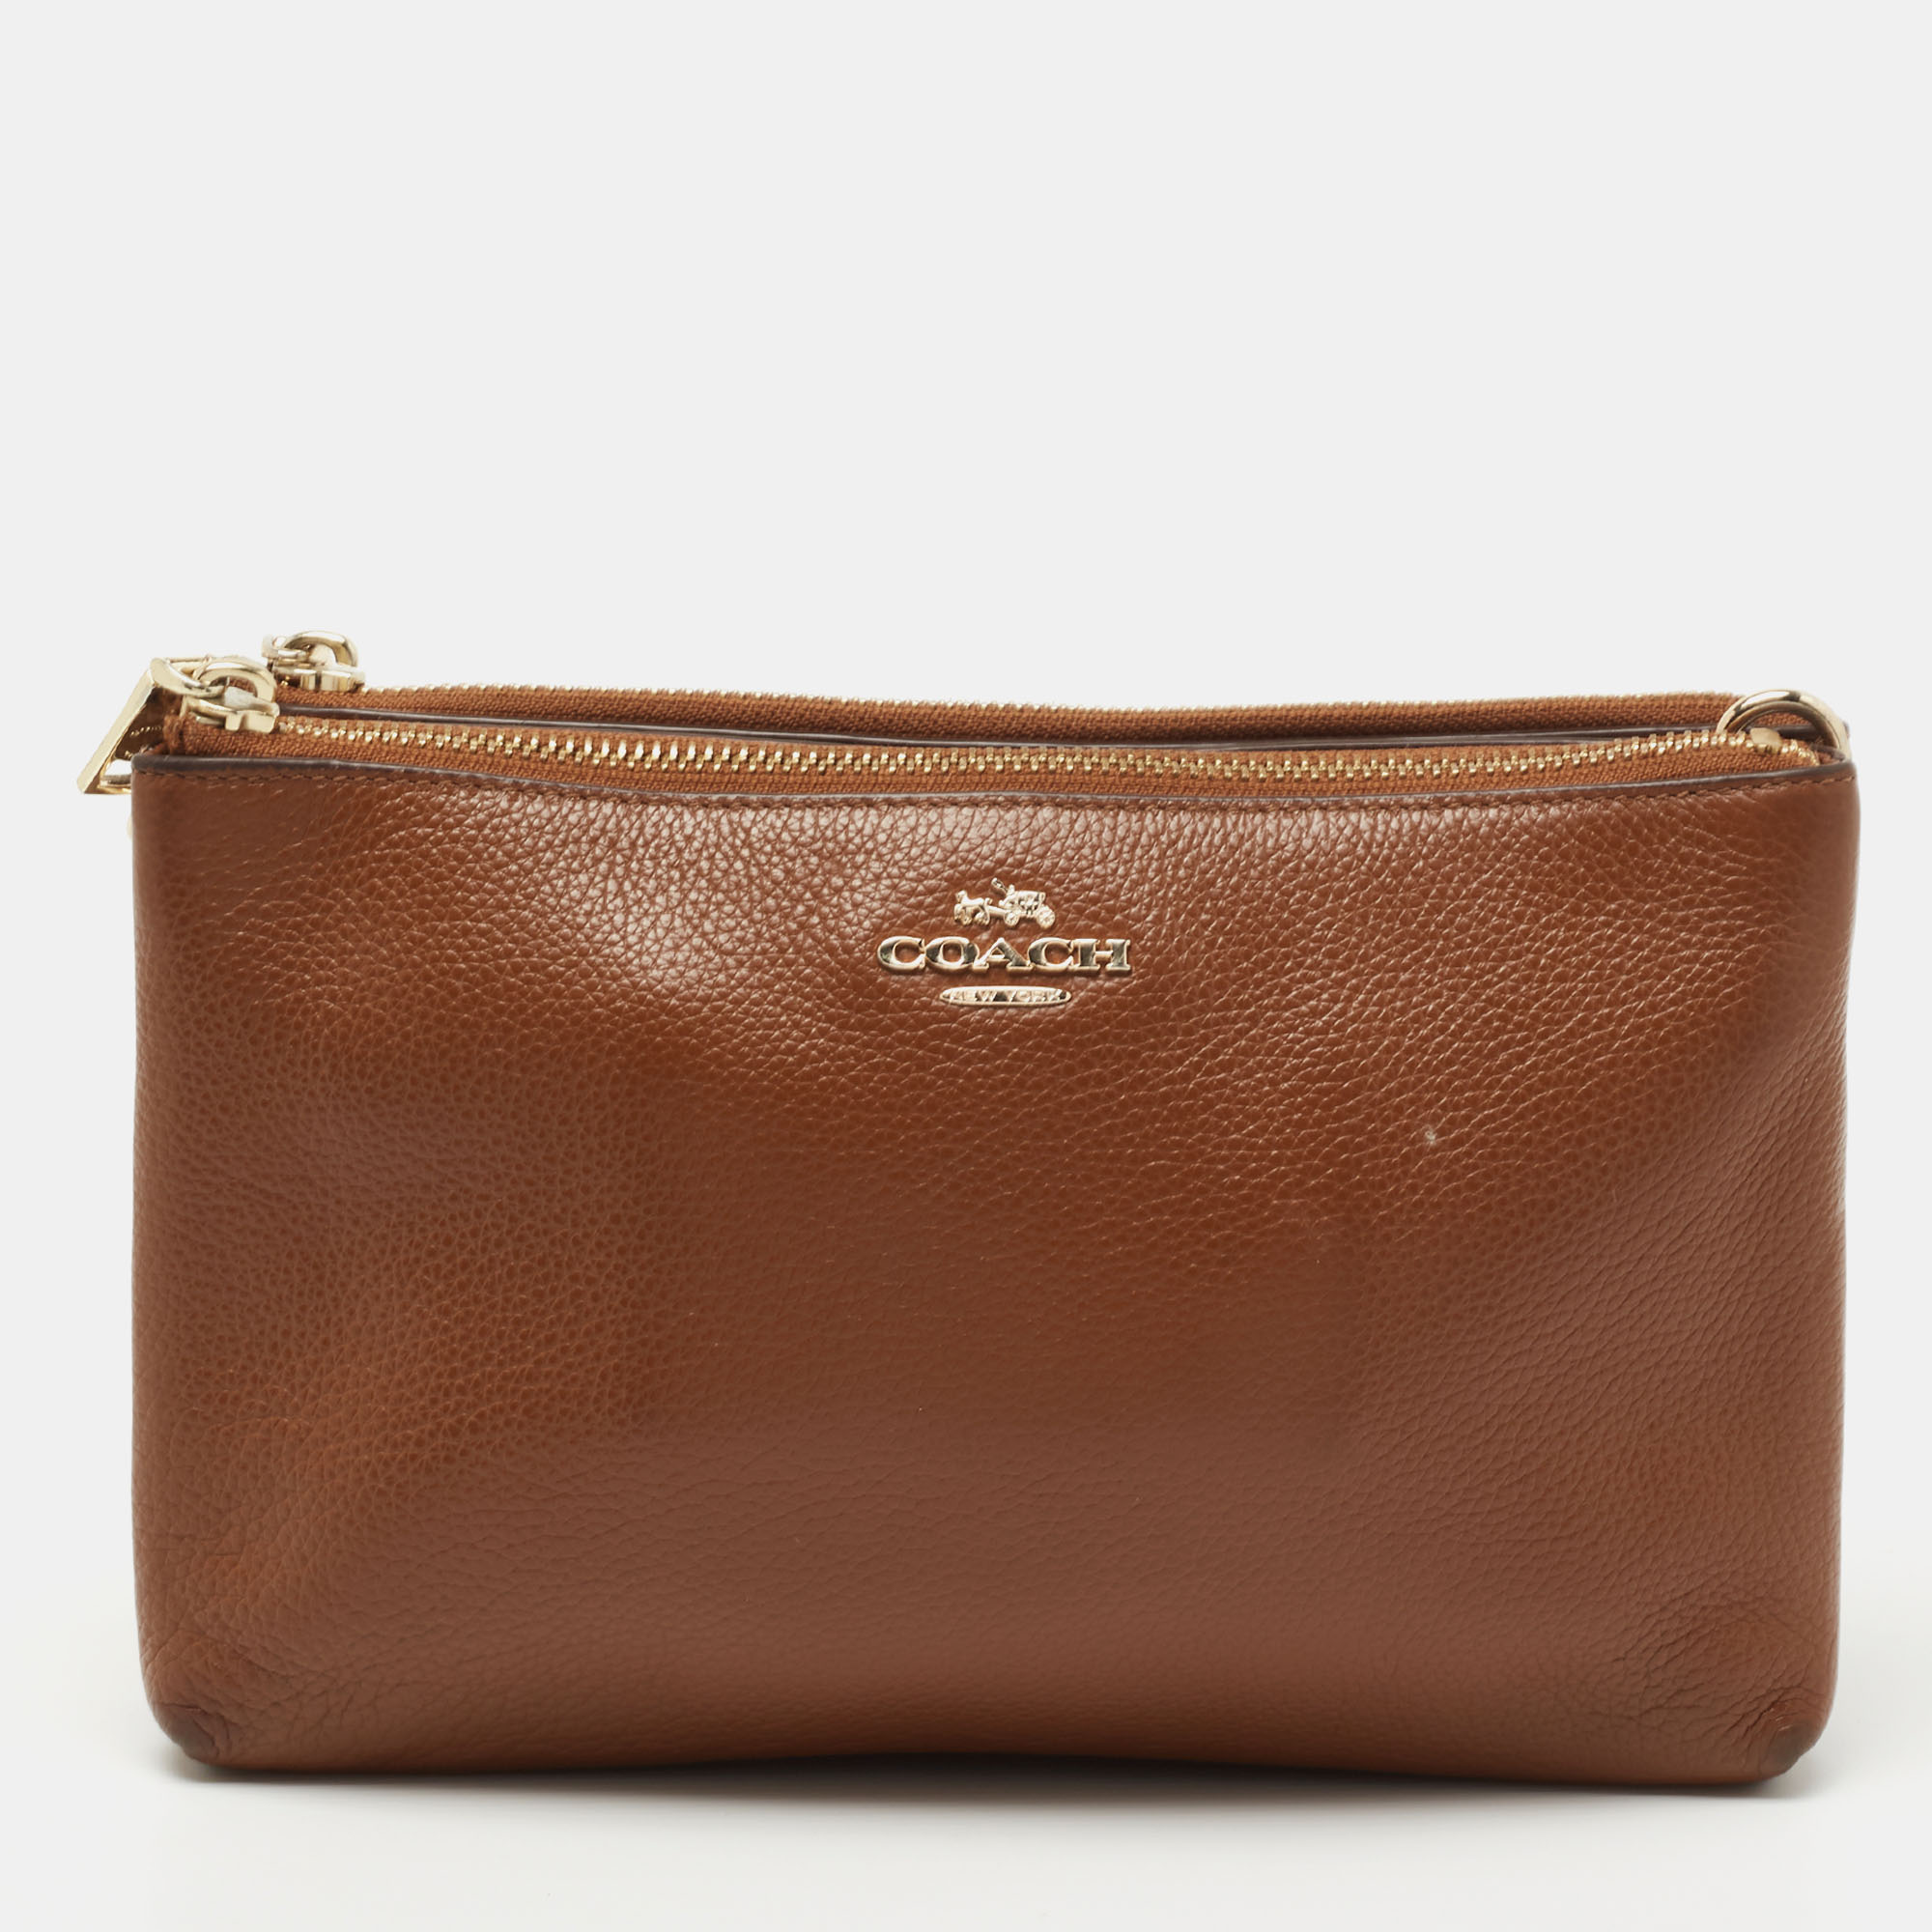 Pre-owned Coach Brown Leather Double Zip Clutch